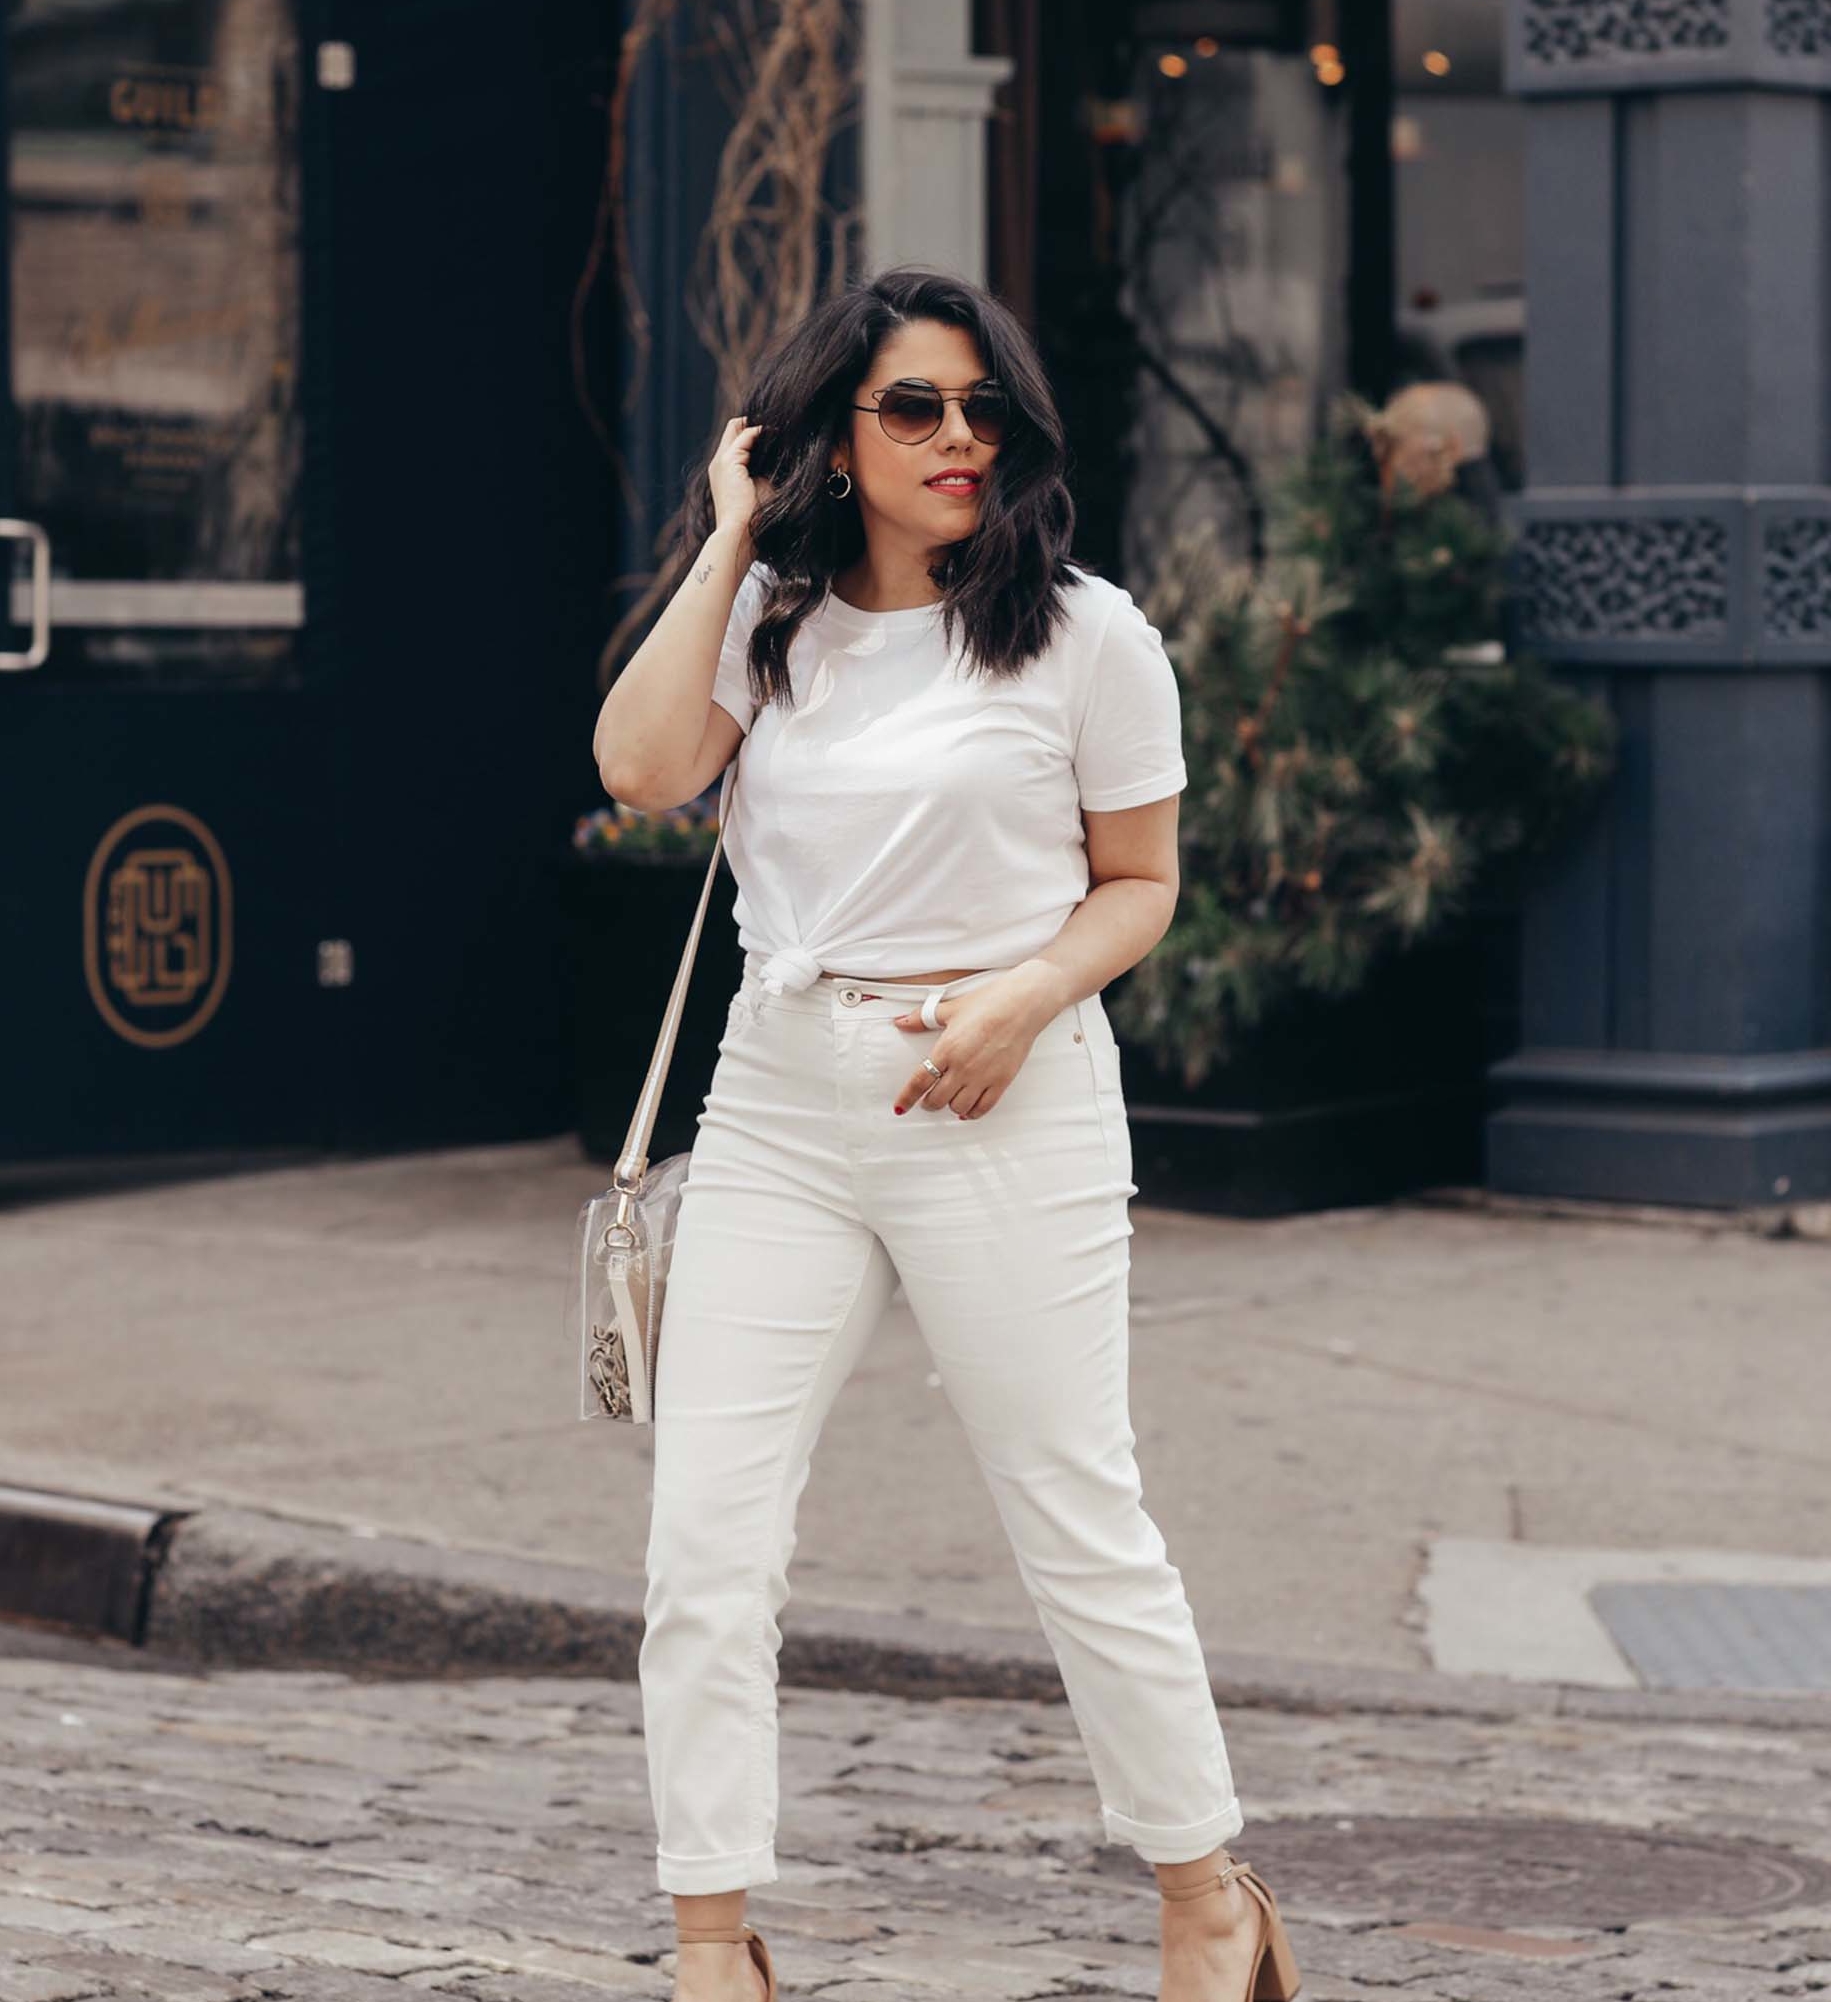 naty michele in white outfit for we dress america